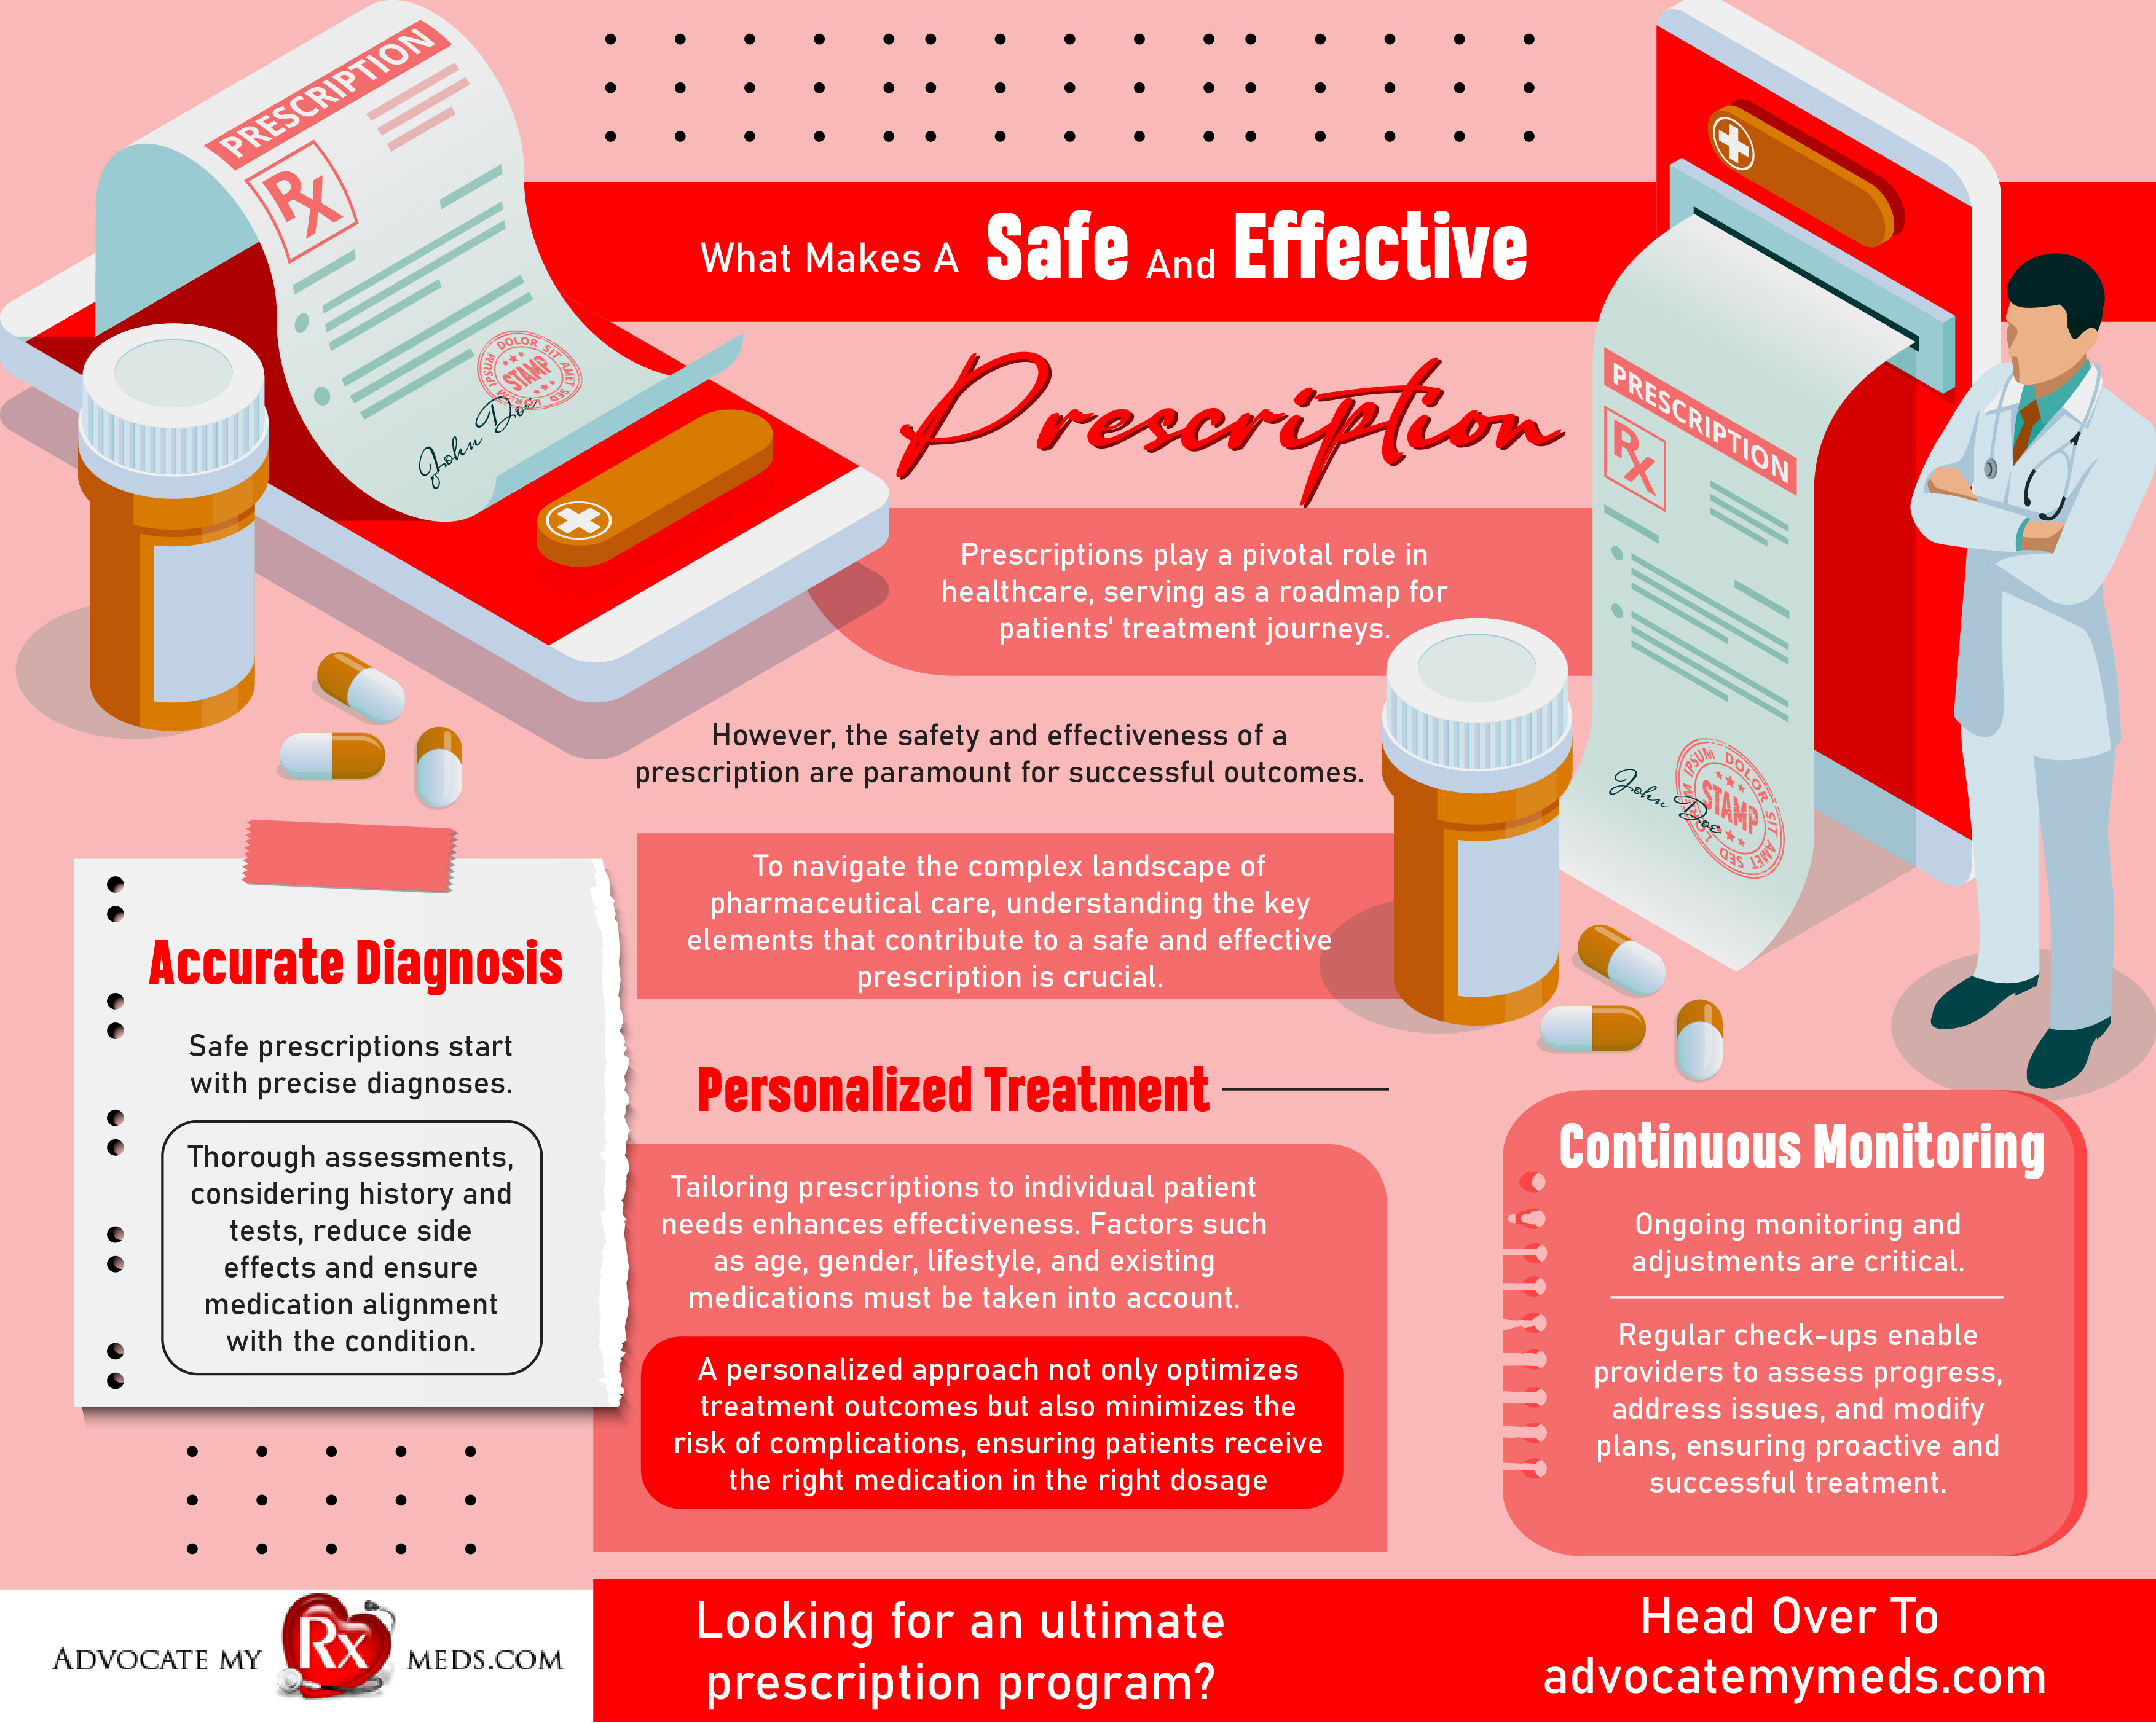 What Makes a Safe and Effective Prescription